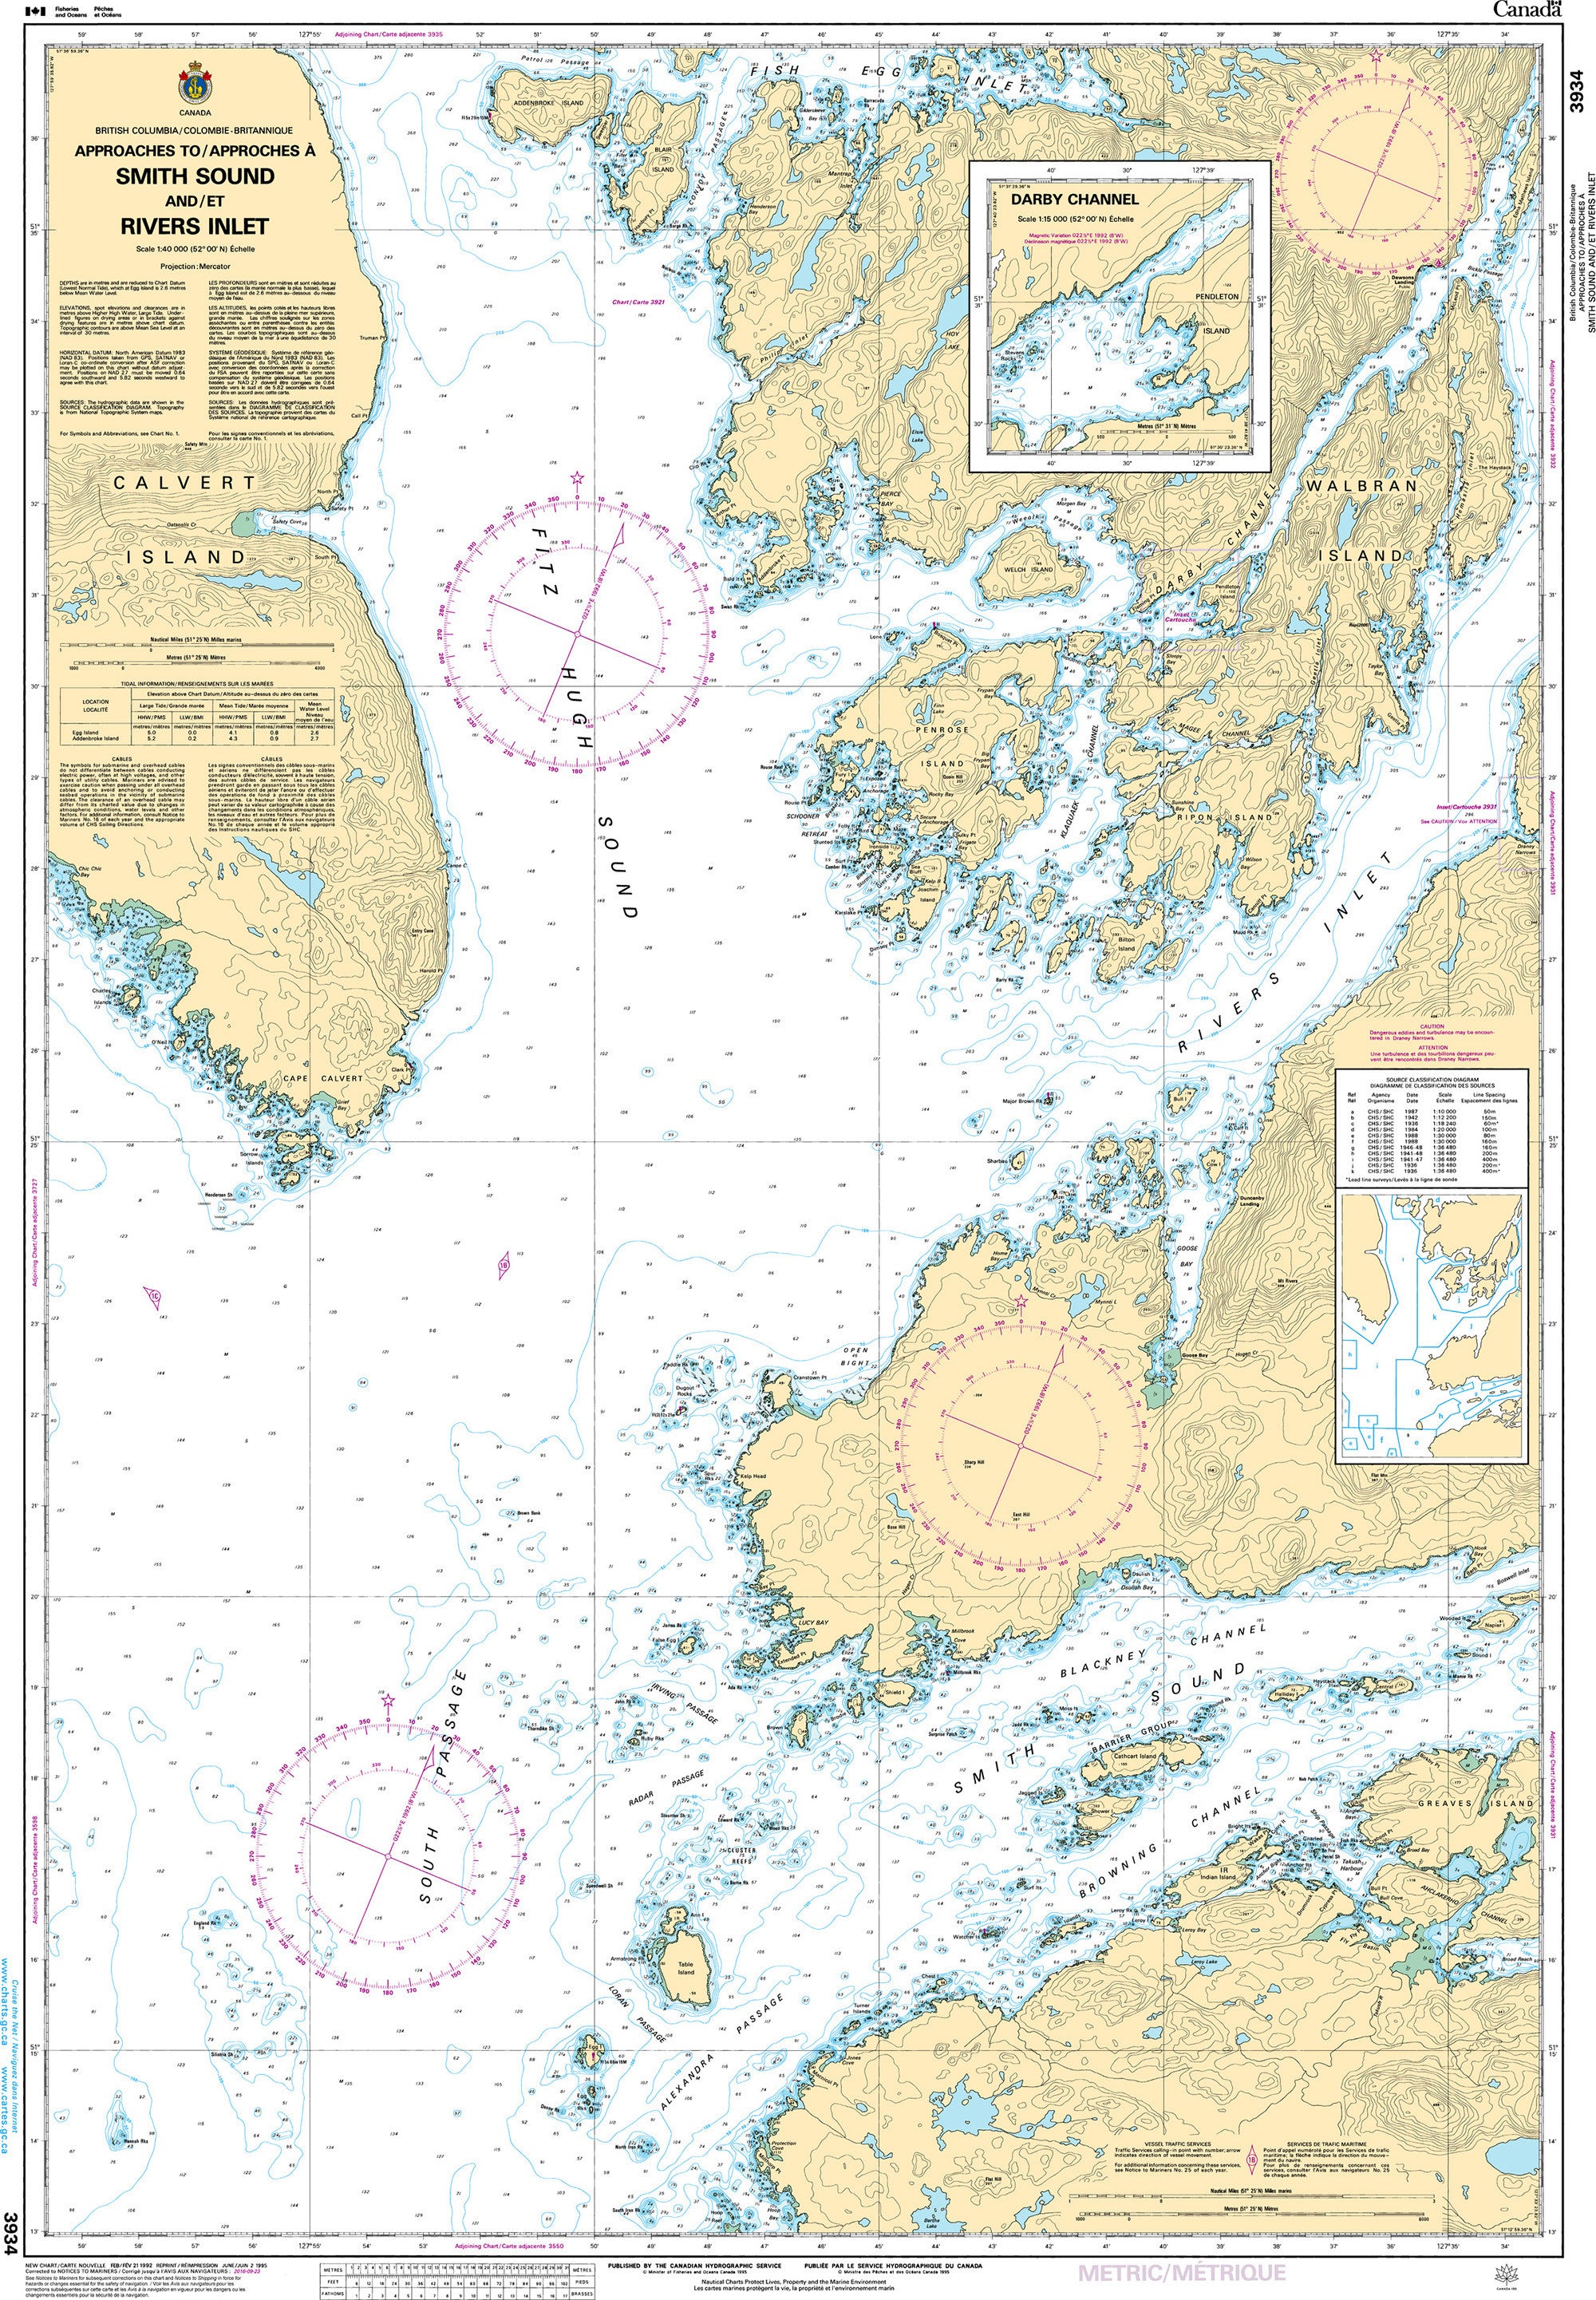 Canadian Hydrographic Service Nautical Chart CHS3934: Approaches to/Approches à Smith Sound and/et Rivers Inlet